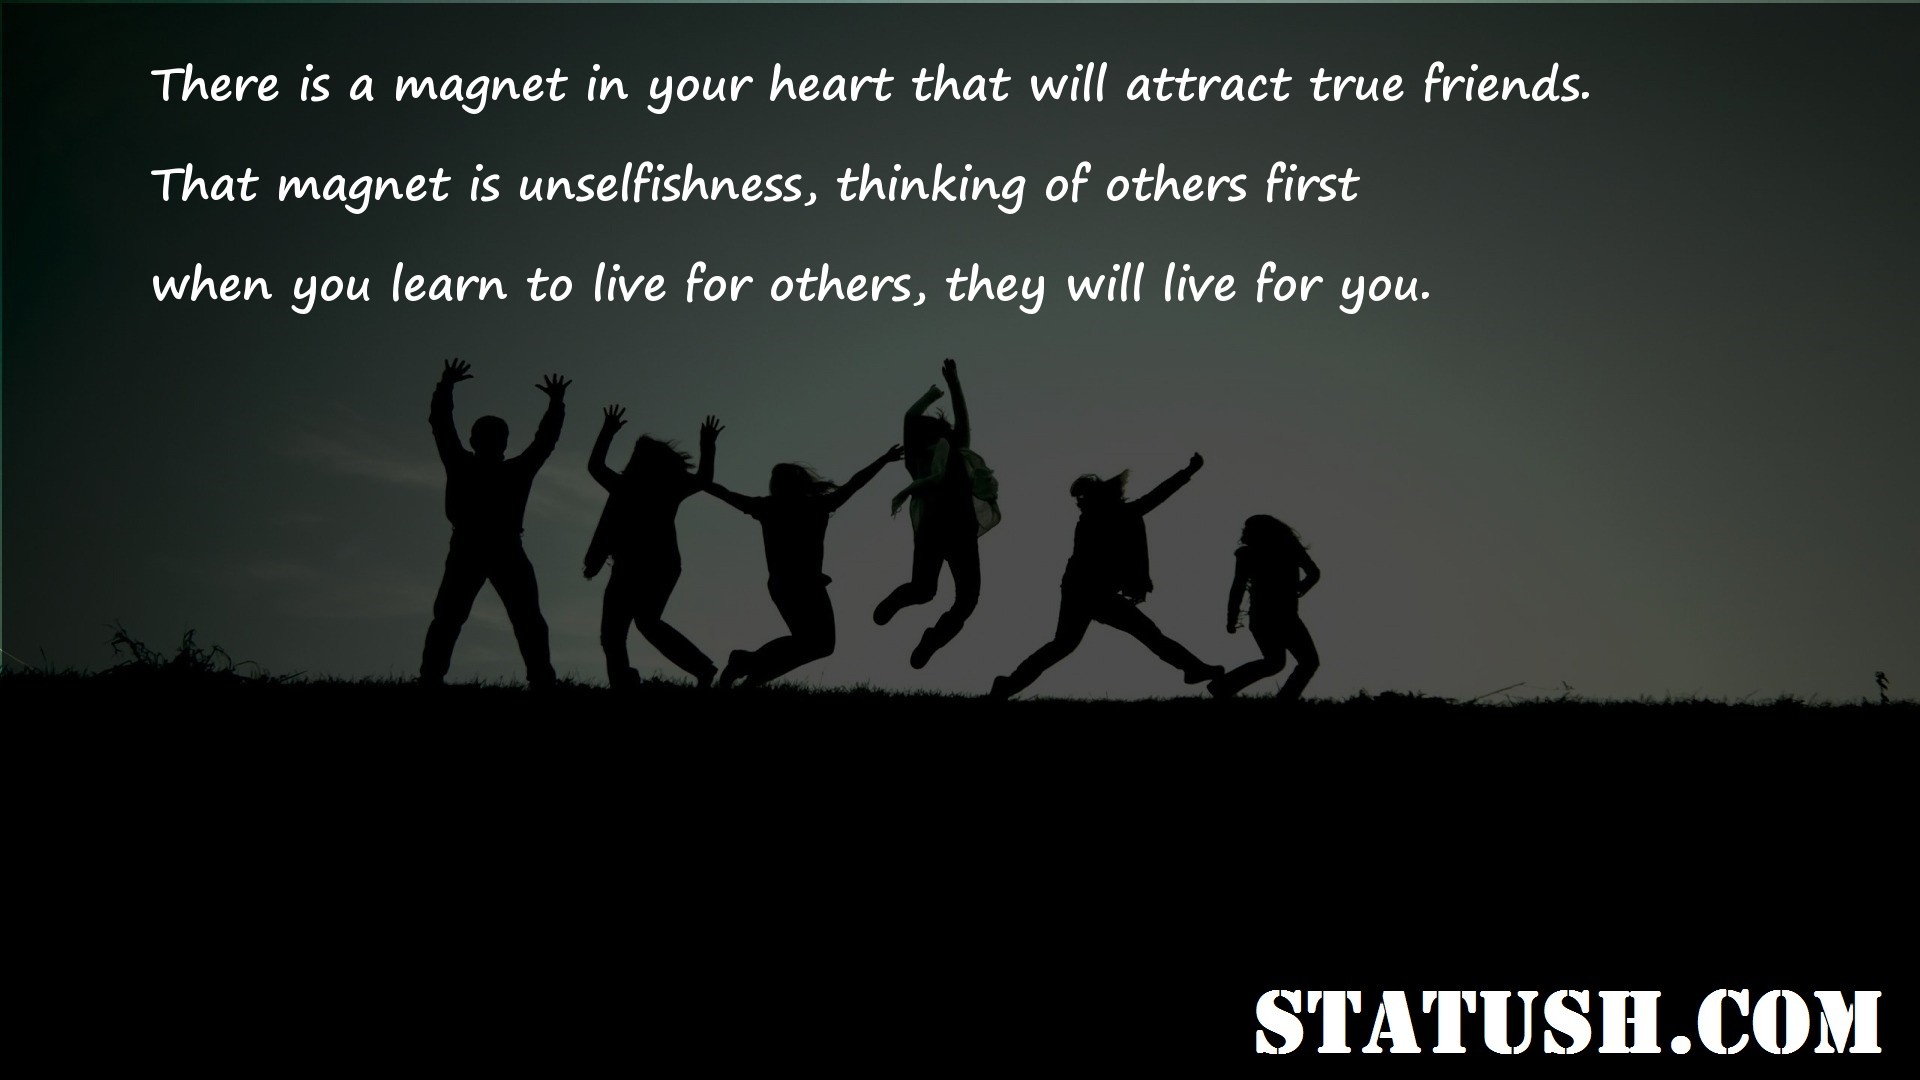 There is a magnet in your heart that will attract true friends - Friendship Quotes at statush.com